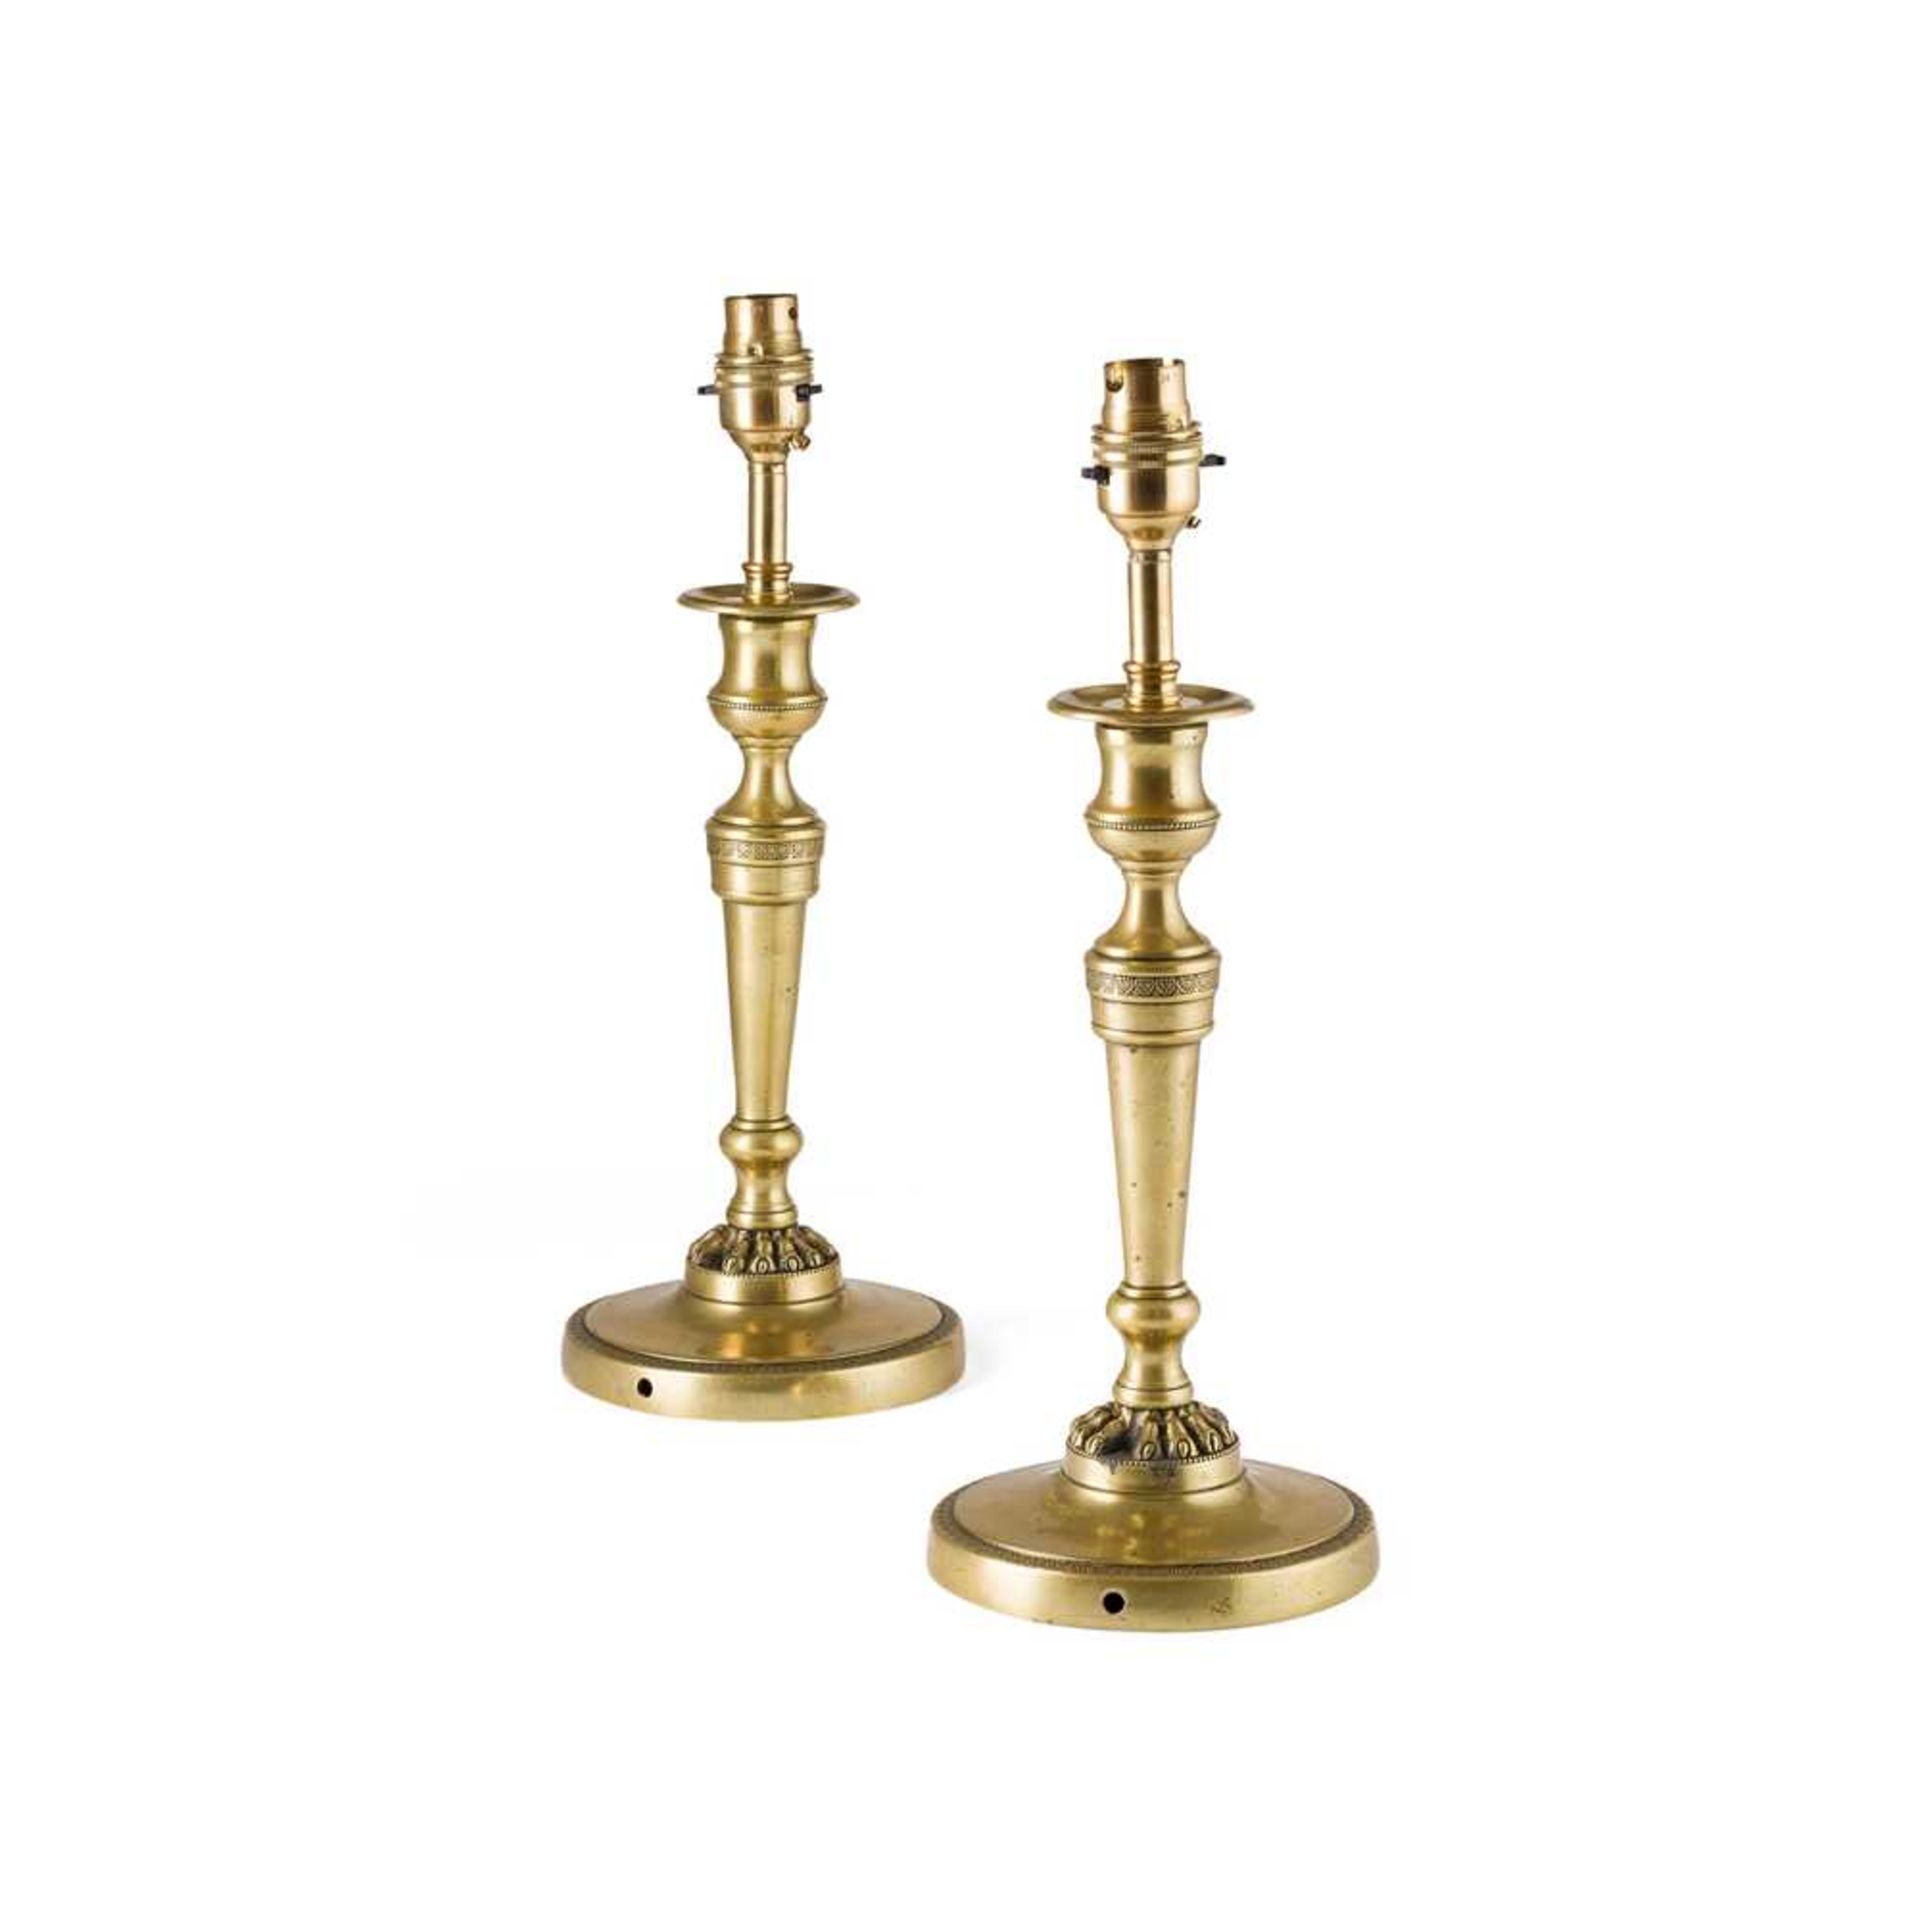 PAIR OF REGENCY BRASS CANDLESTICK LAMPS LATE 18TH CENTURY - Image 2 of 2